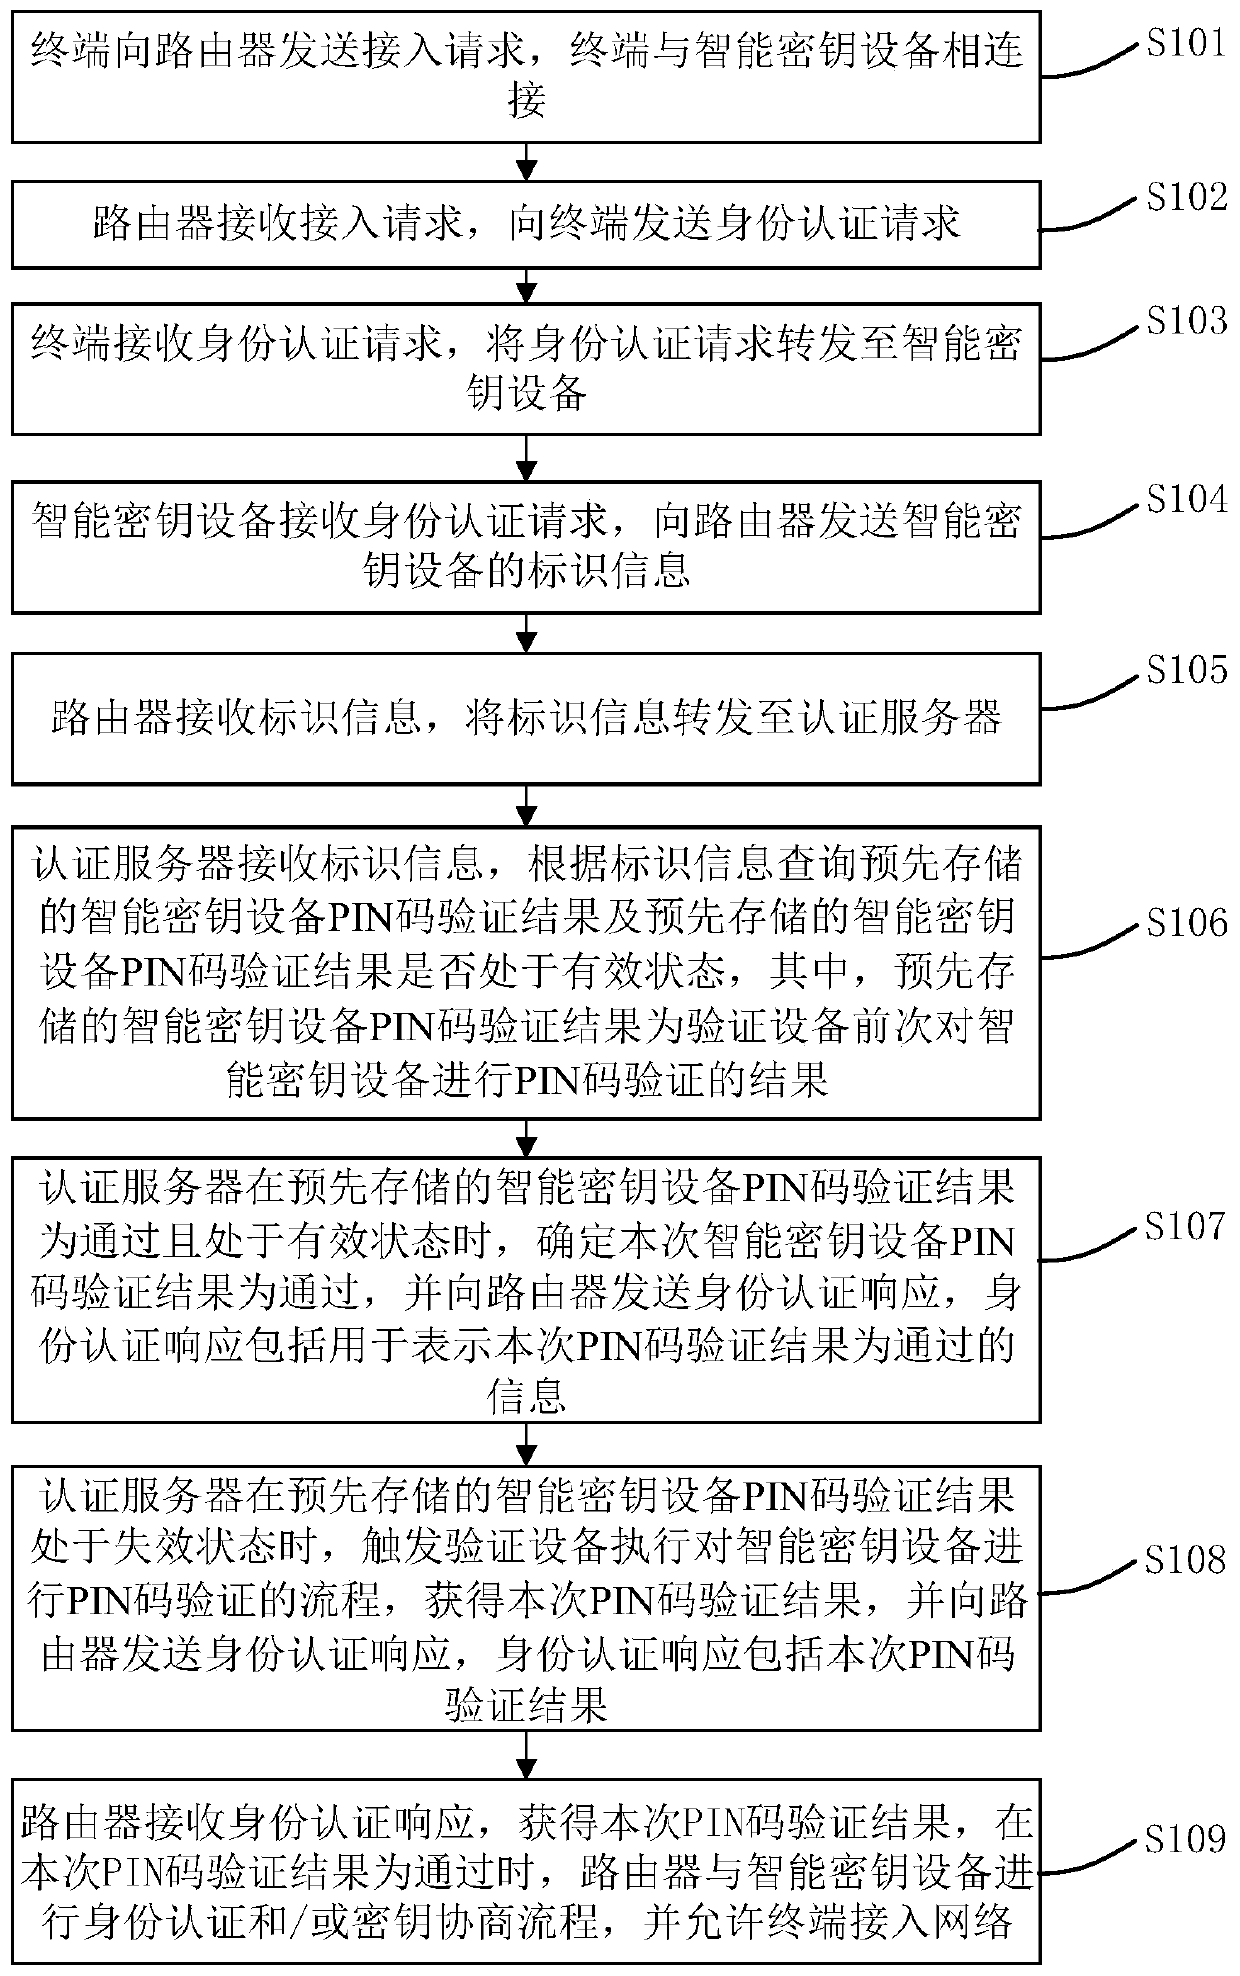 A network access method and system